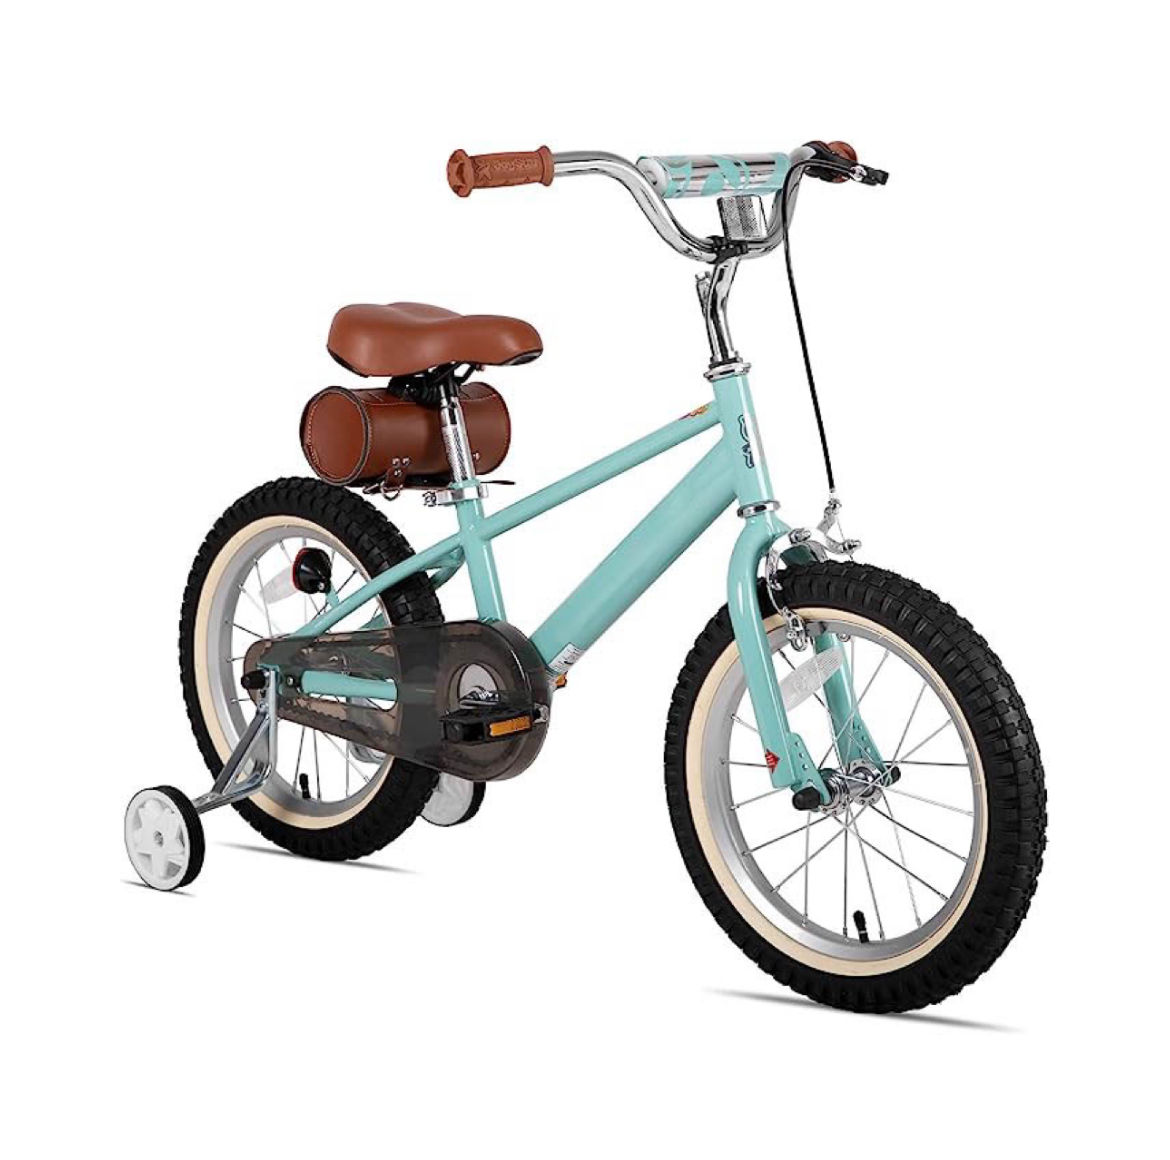 12, 14, 16 Inches Fits Children’s Bikes Ages 3-12 Years Old